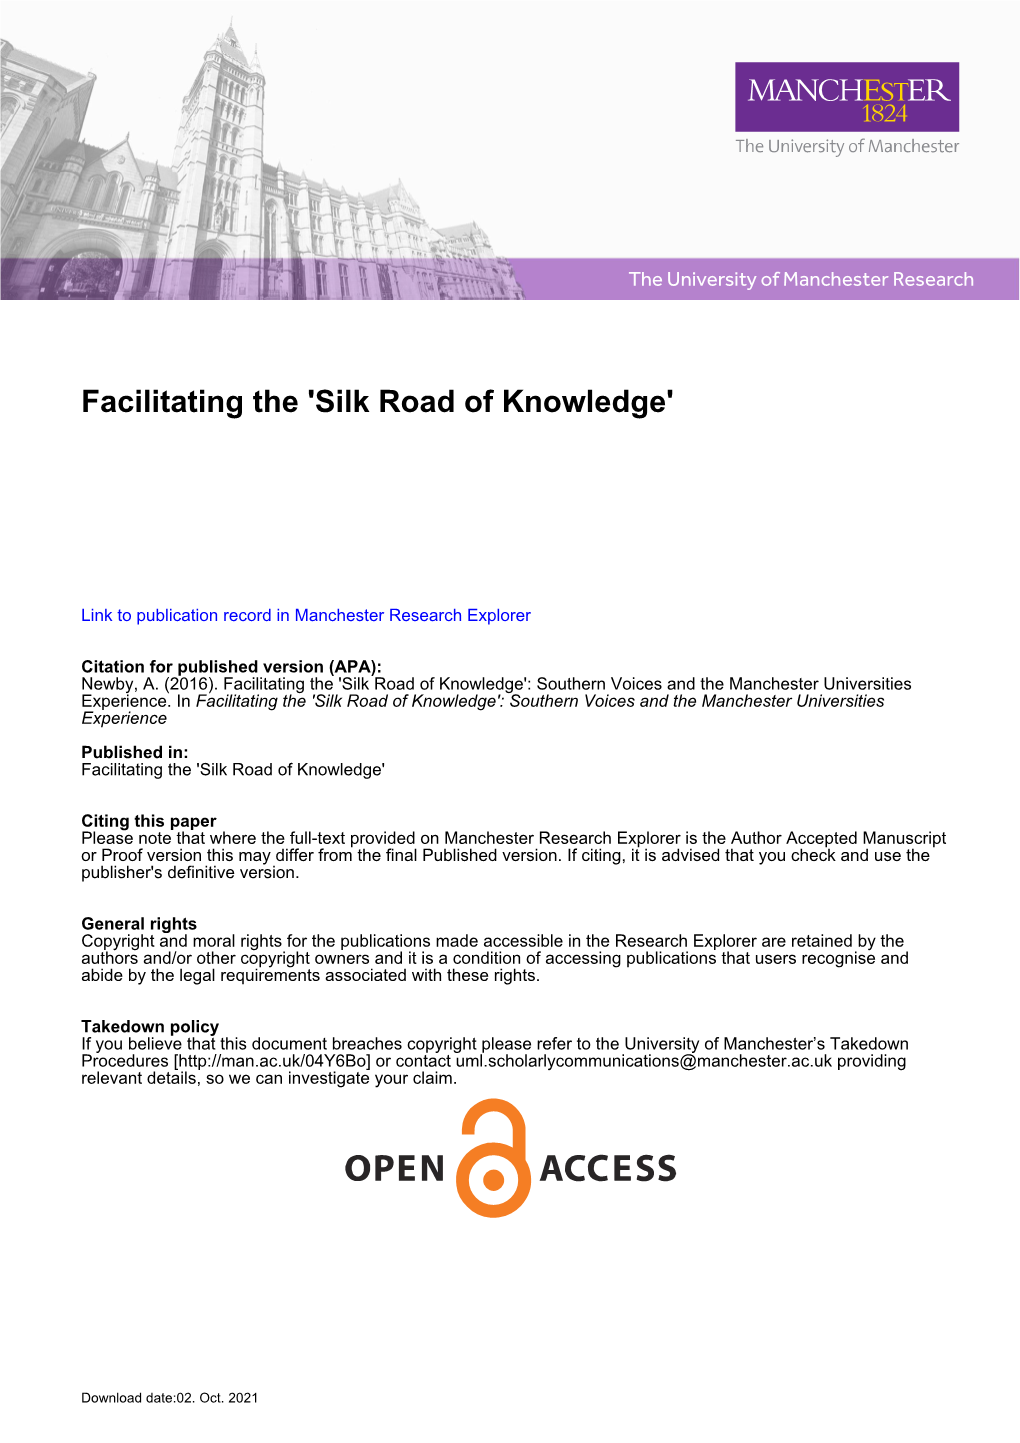 Facilitating the 'Silk Road of Knowledge'